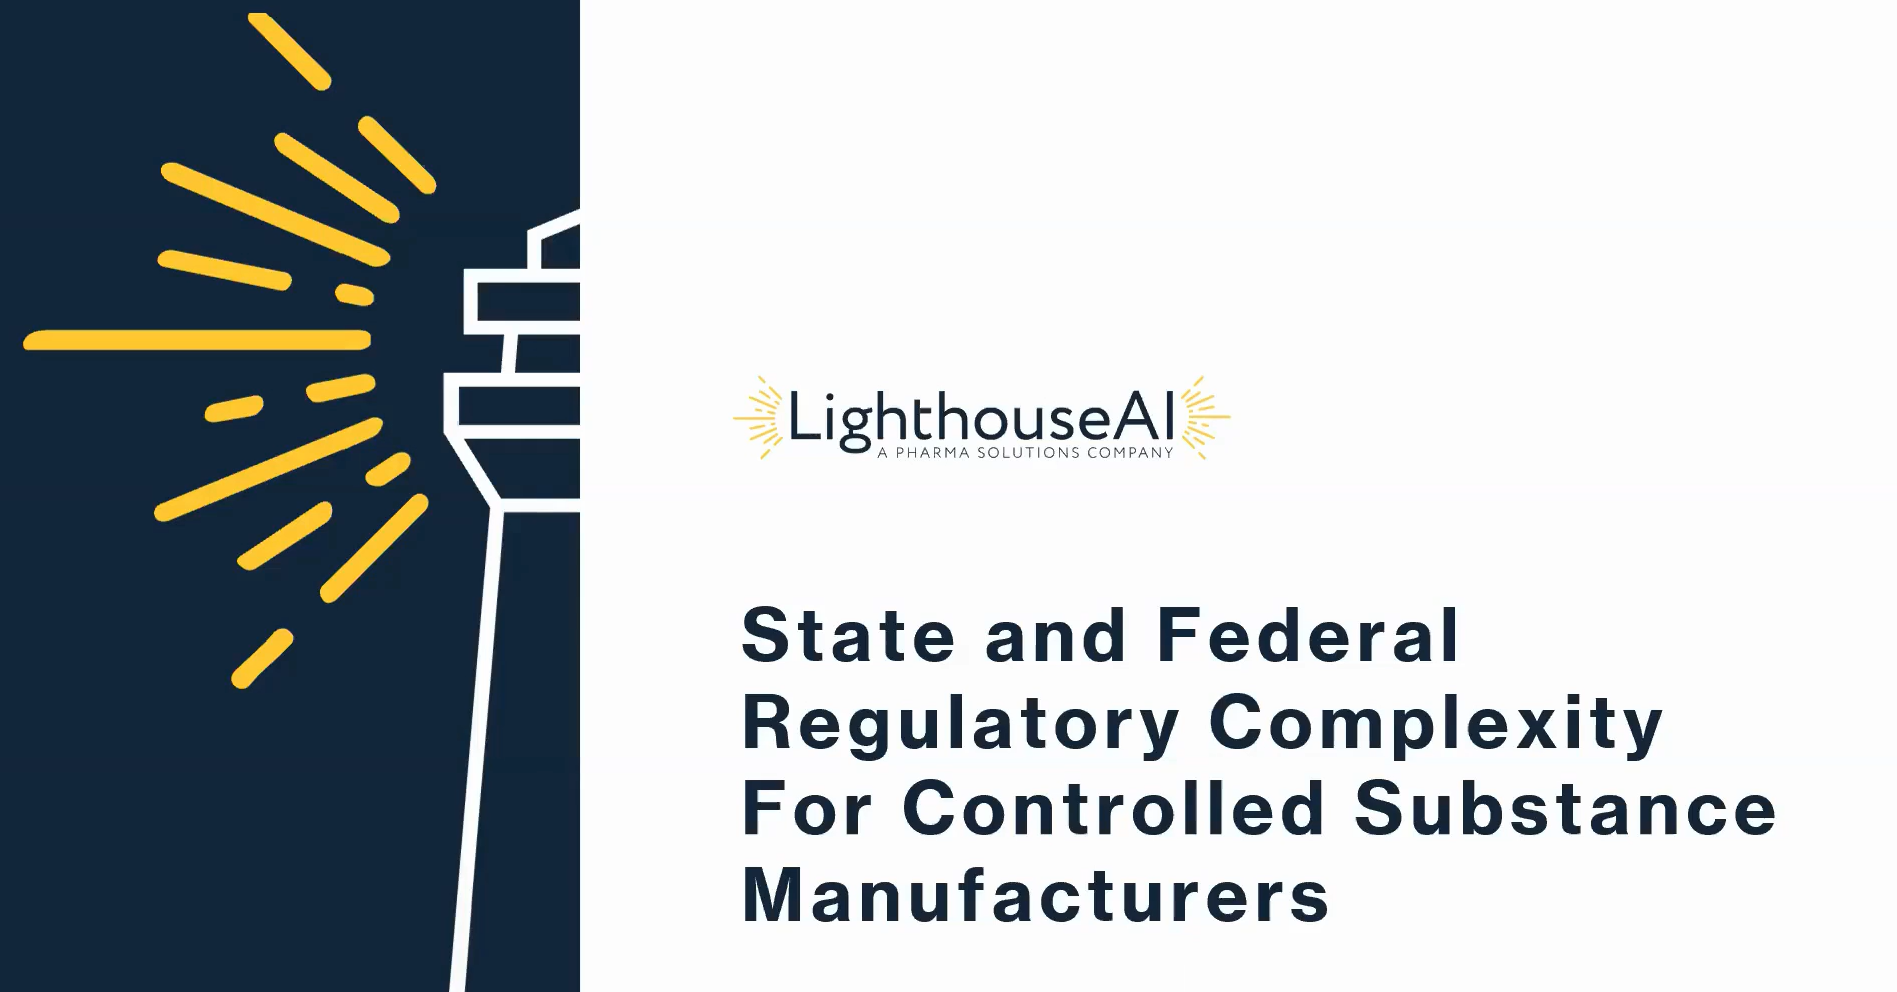 State and Federal Regulatory Complexities for Controlled Substance Manufacturers